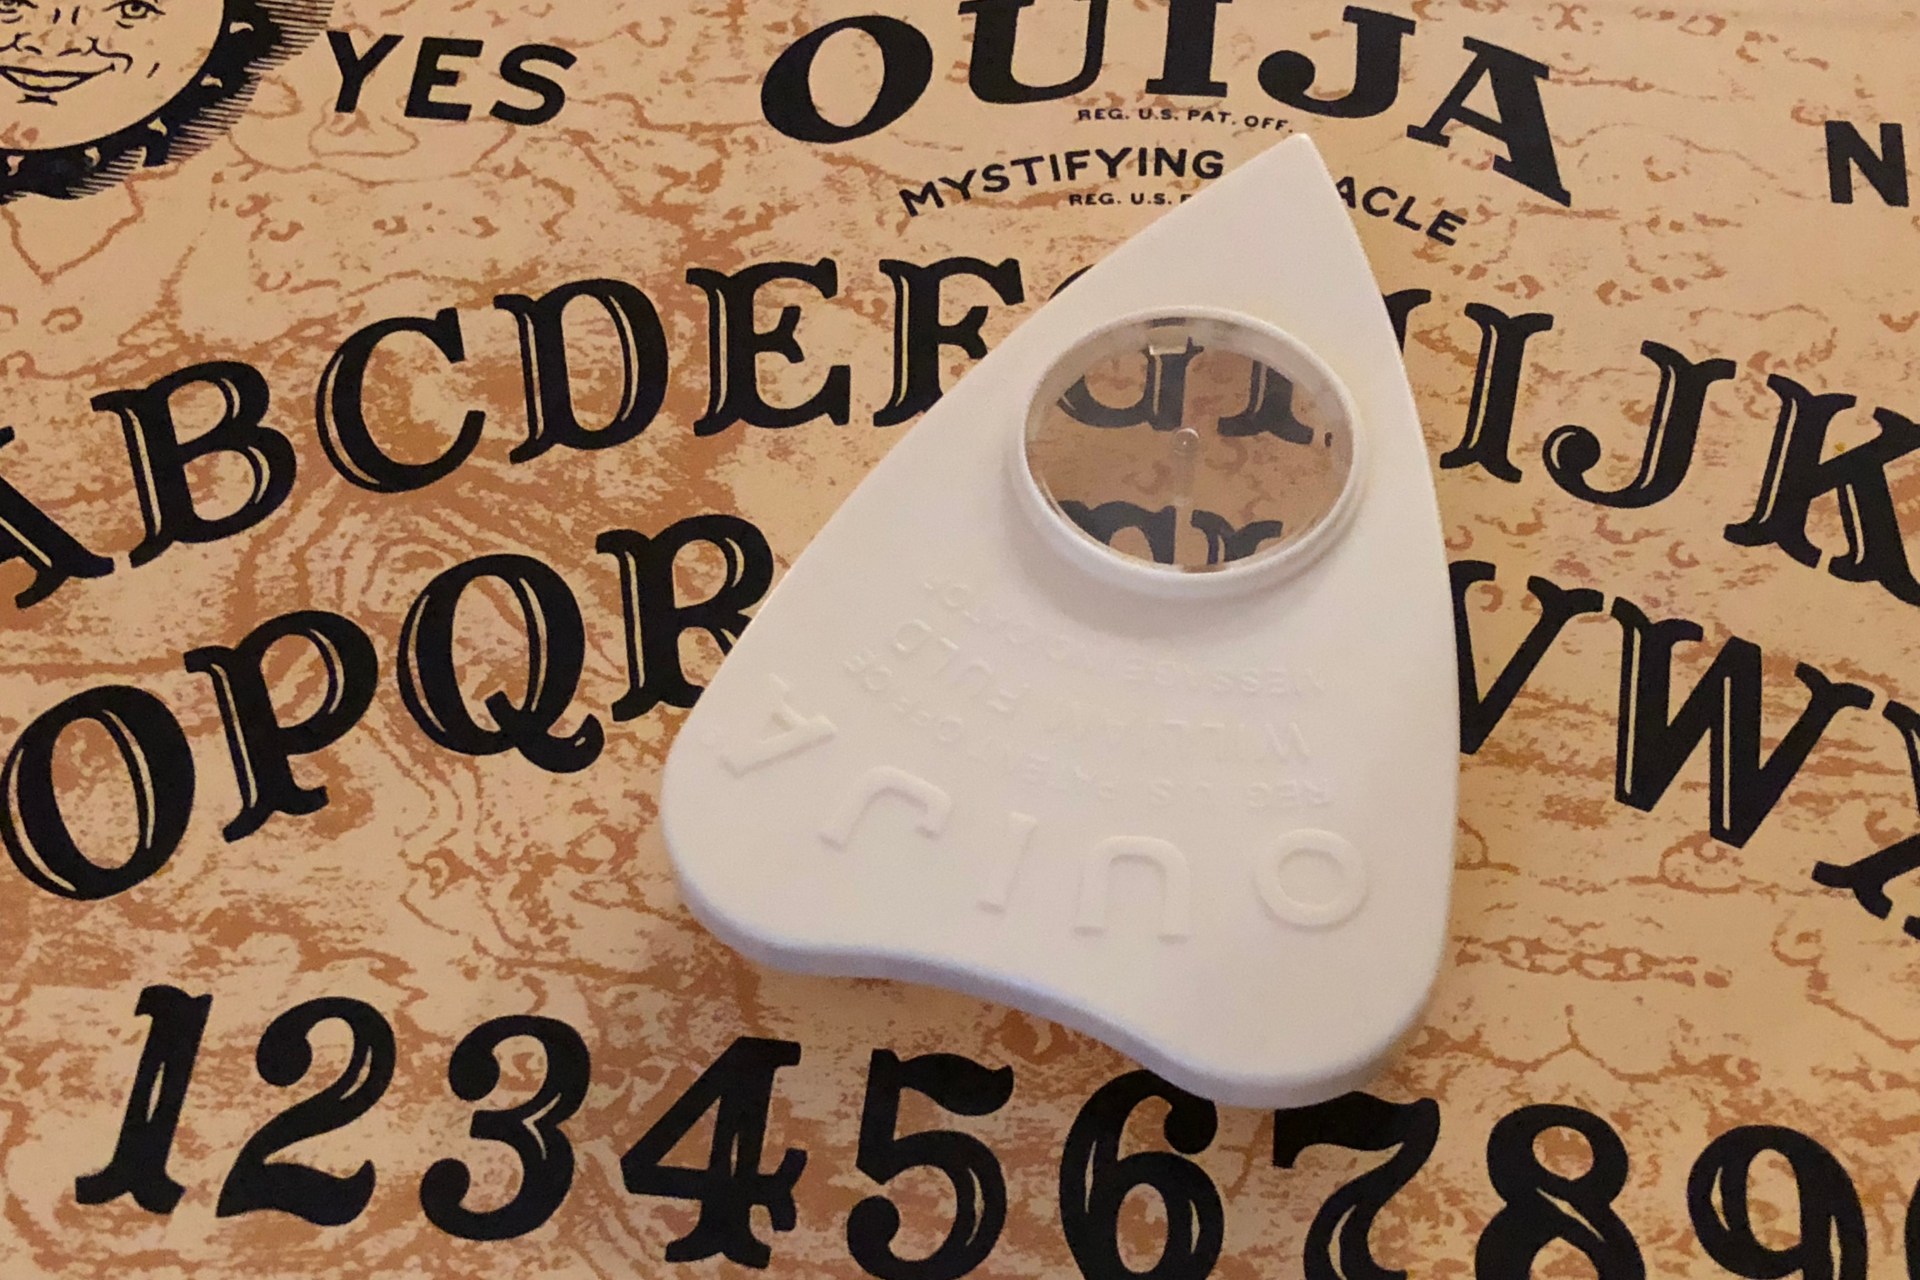 20+ Terrifying And True Ouija Board Stories | Thought Catalog